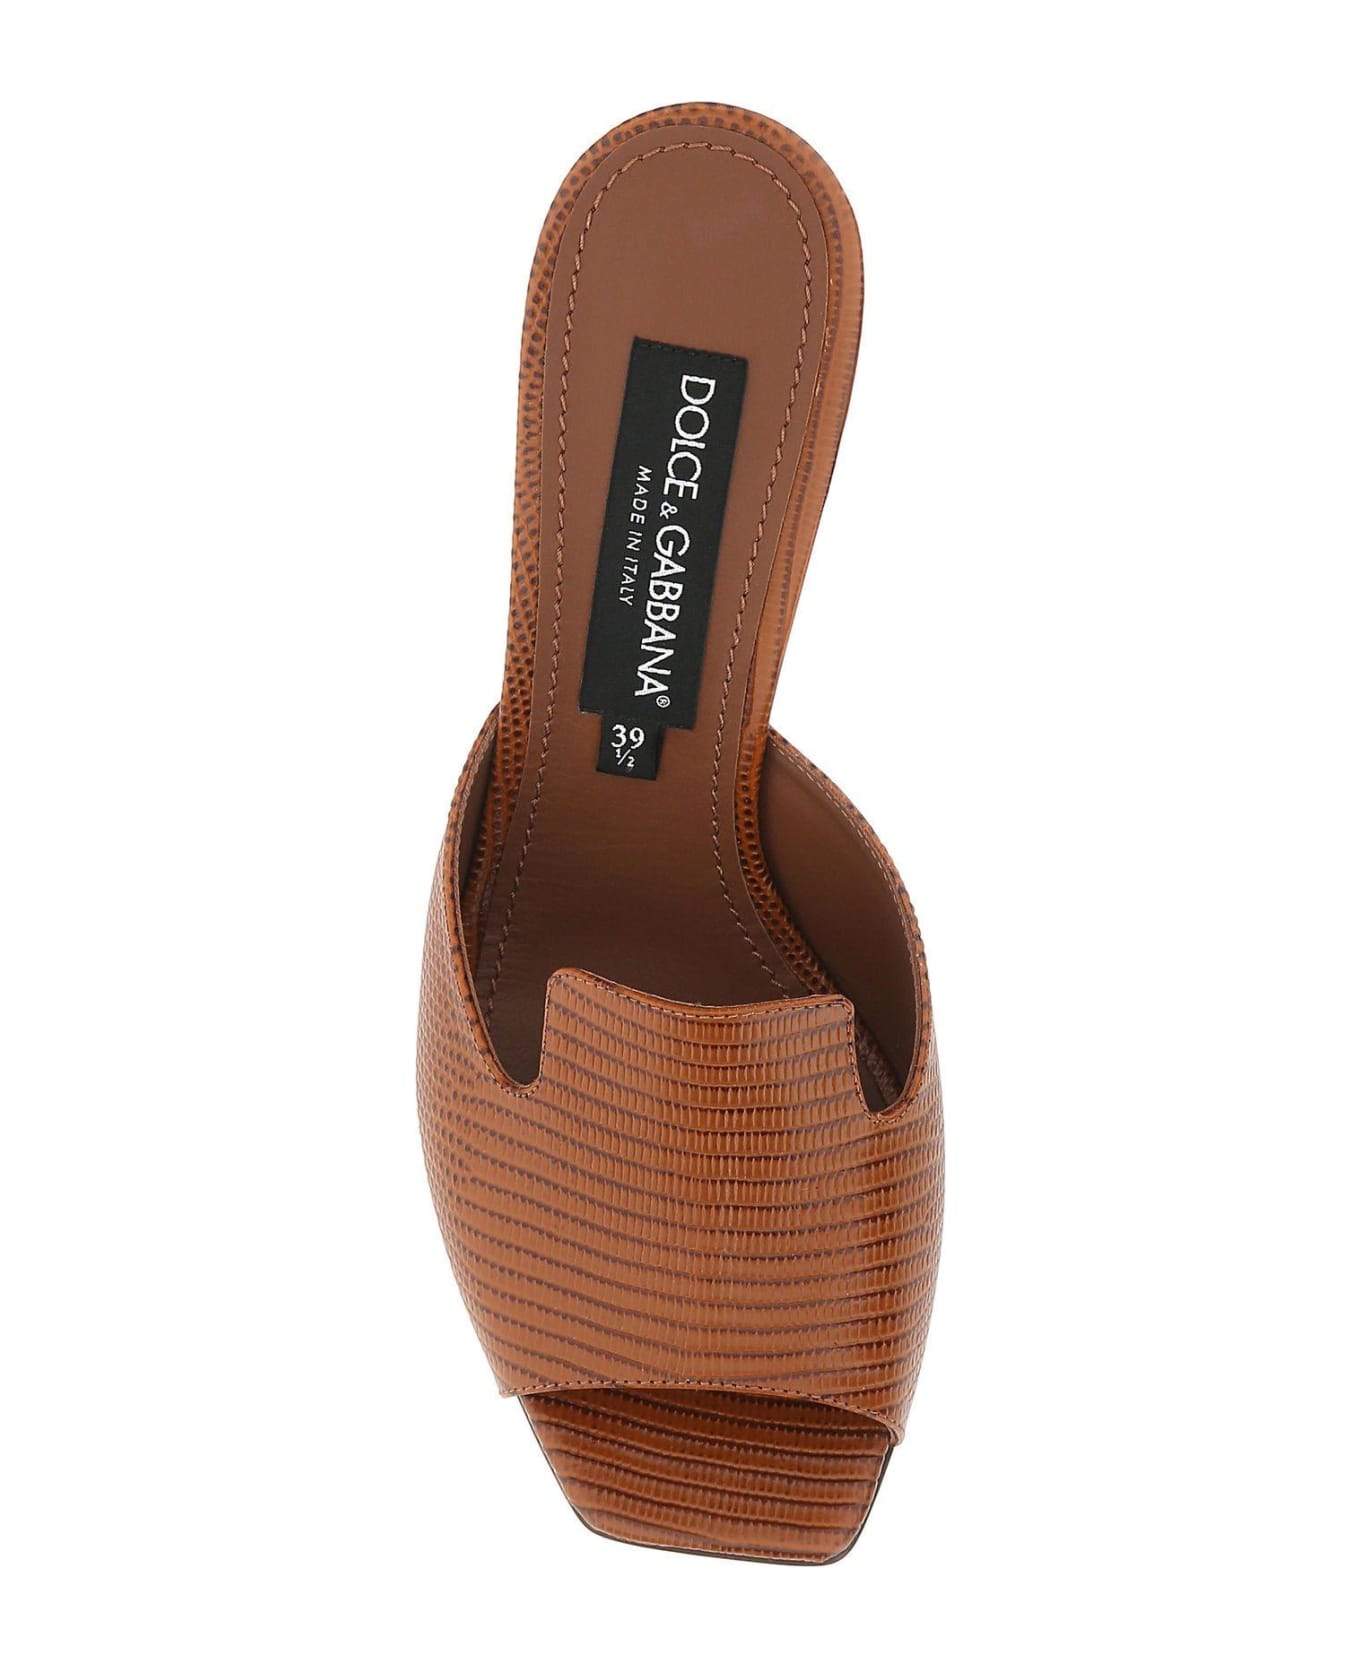 Dolce & Gabbana Brown Leather Mules - Cuoio サンダル